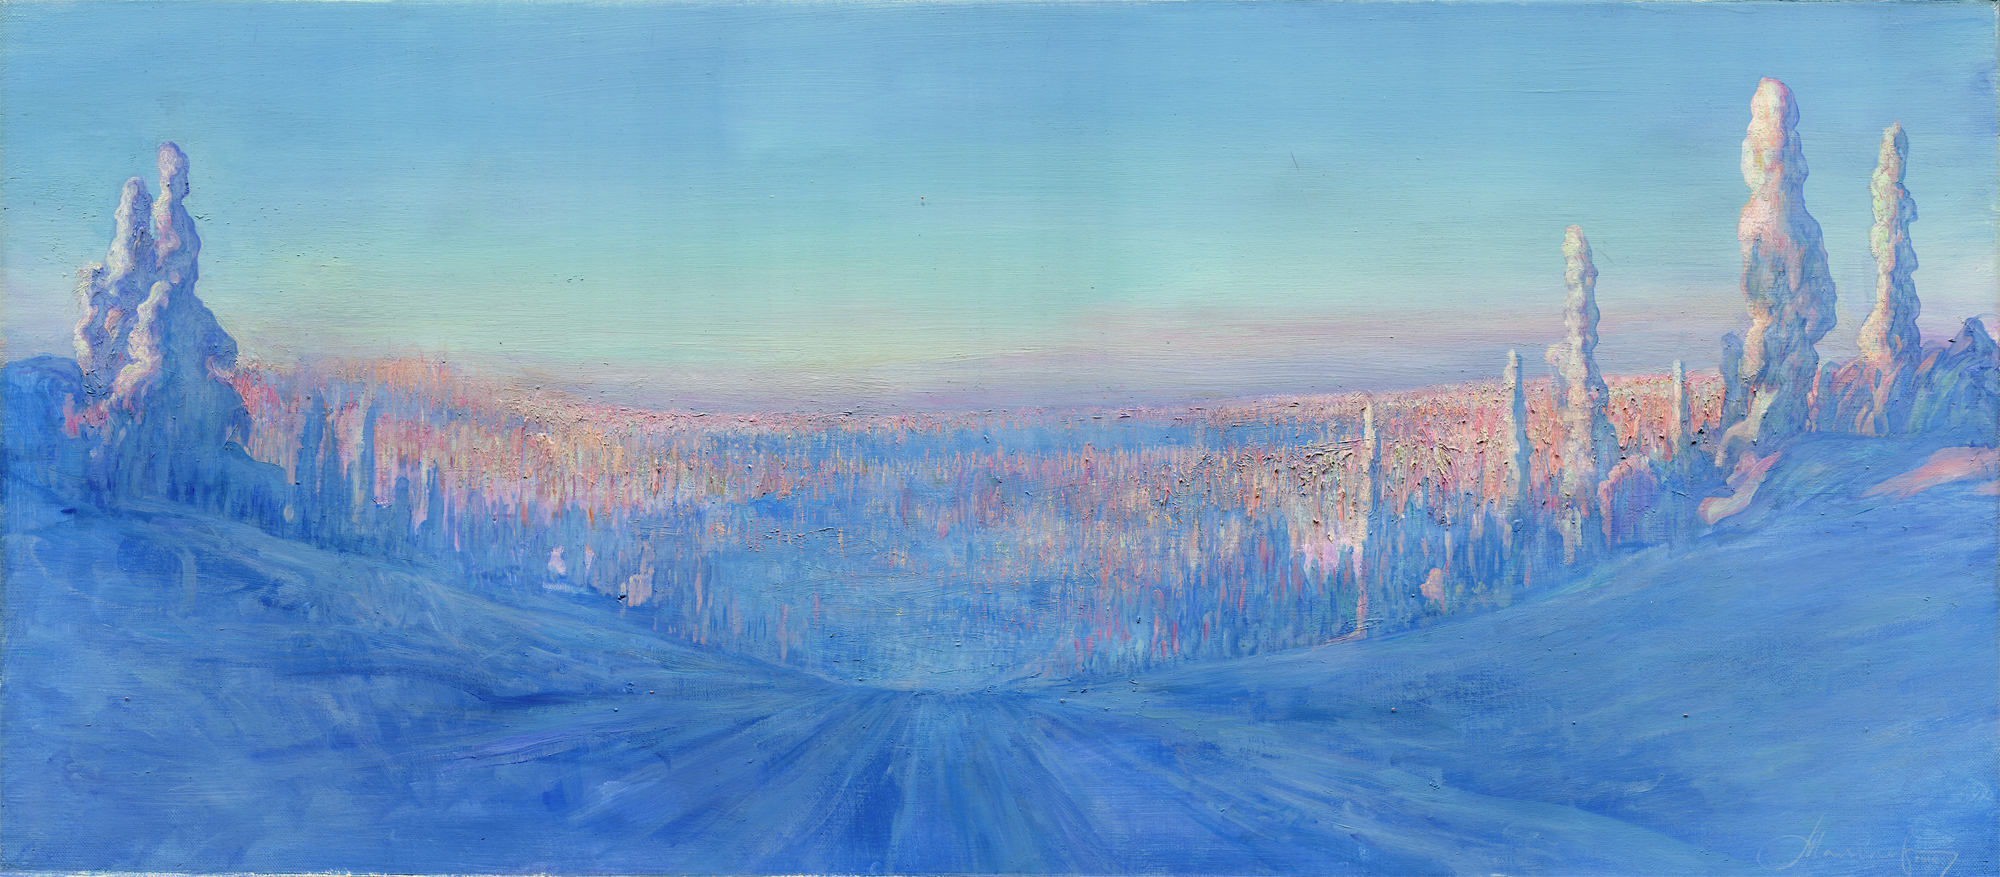 Road to the Arctic  - 1, Andrey Mamaev, Buy the painting Oil